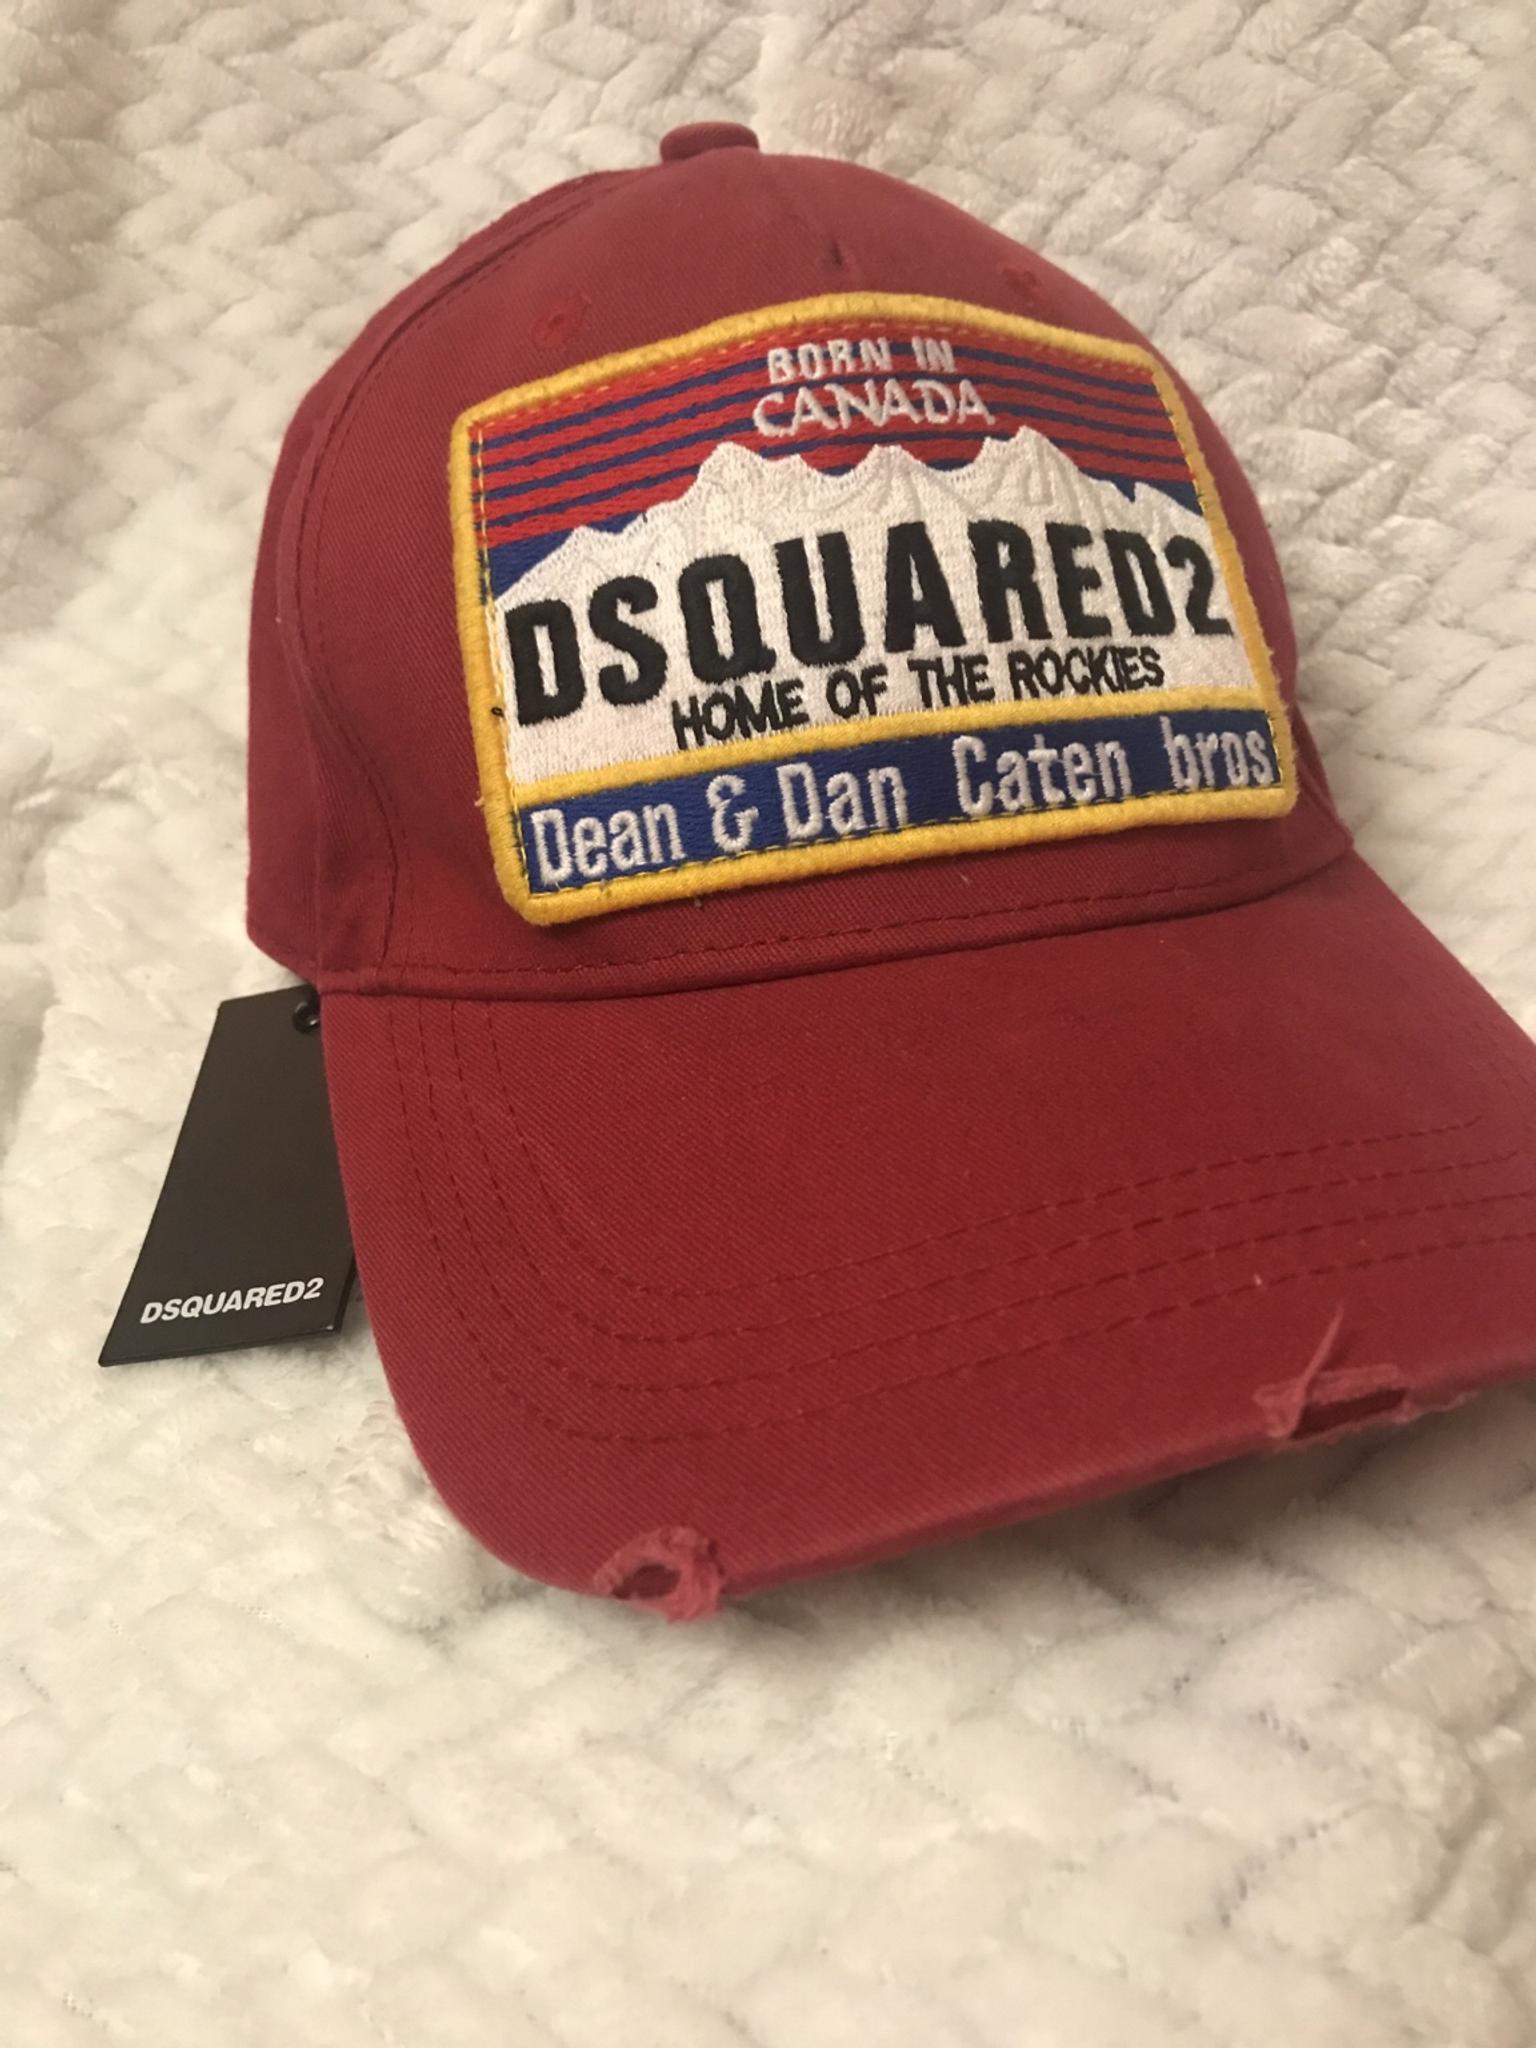 dsquared home of the rockies cap